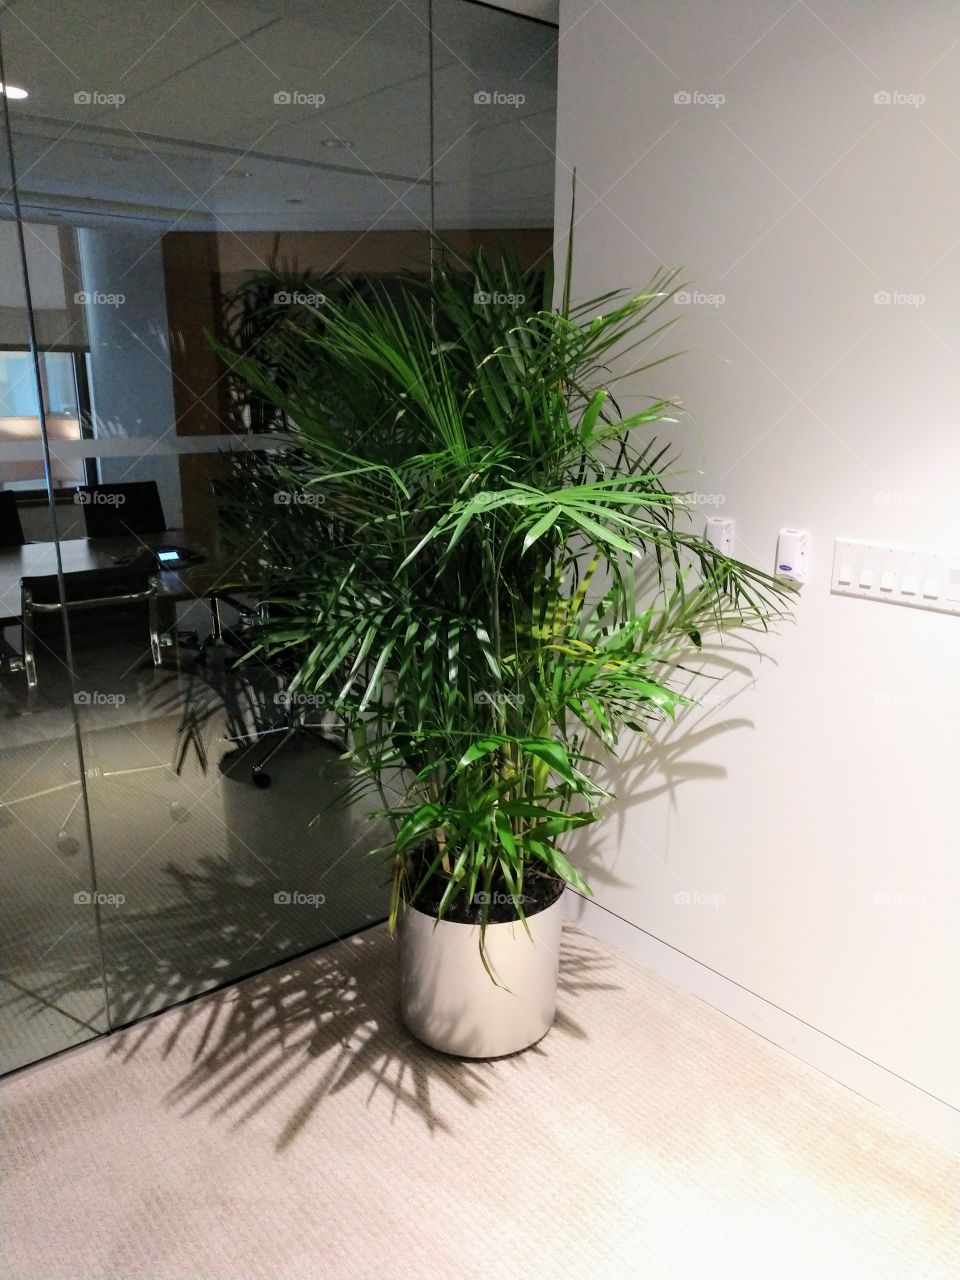 Large tree in office lobby